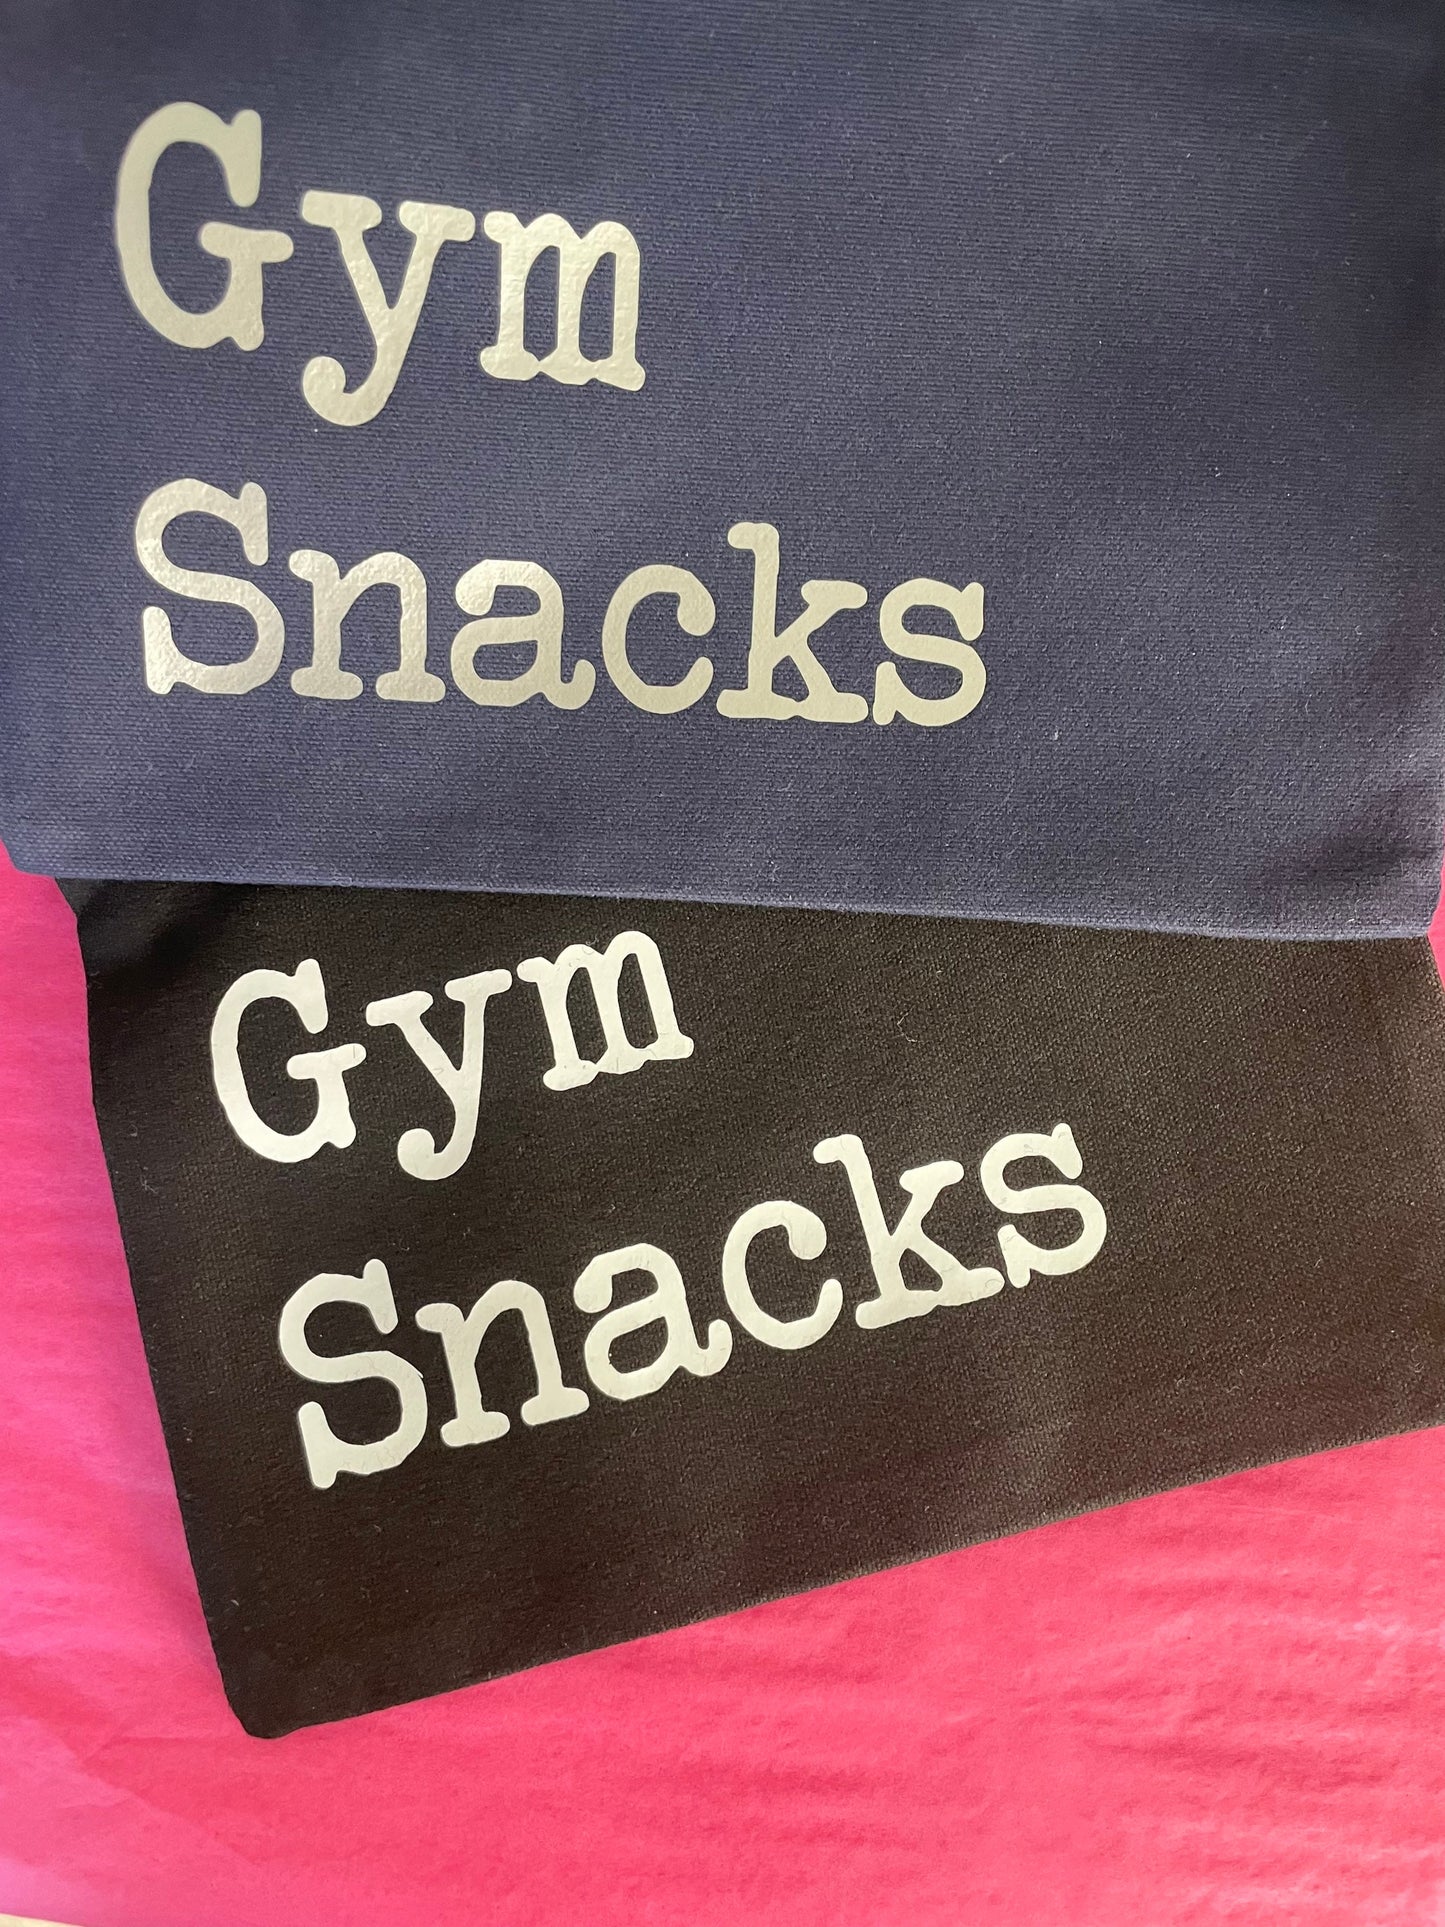 Gym Snacks pouch bag, personalised gym pouch for protein bars or energy drinks, Christmas gift for gym lovers. Get fit New Years resolution